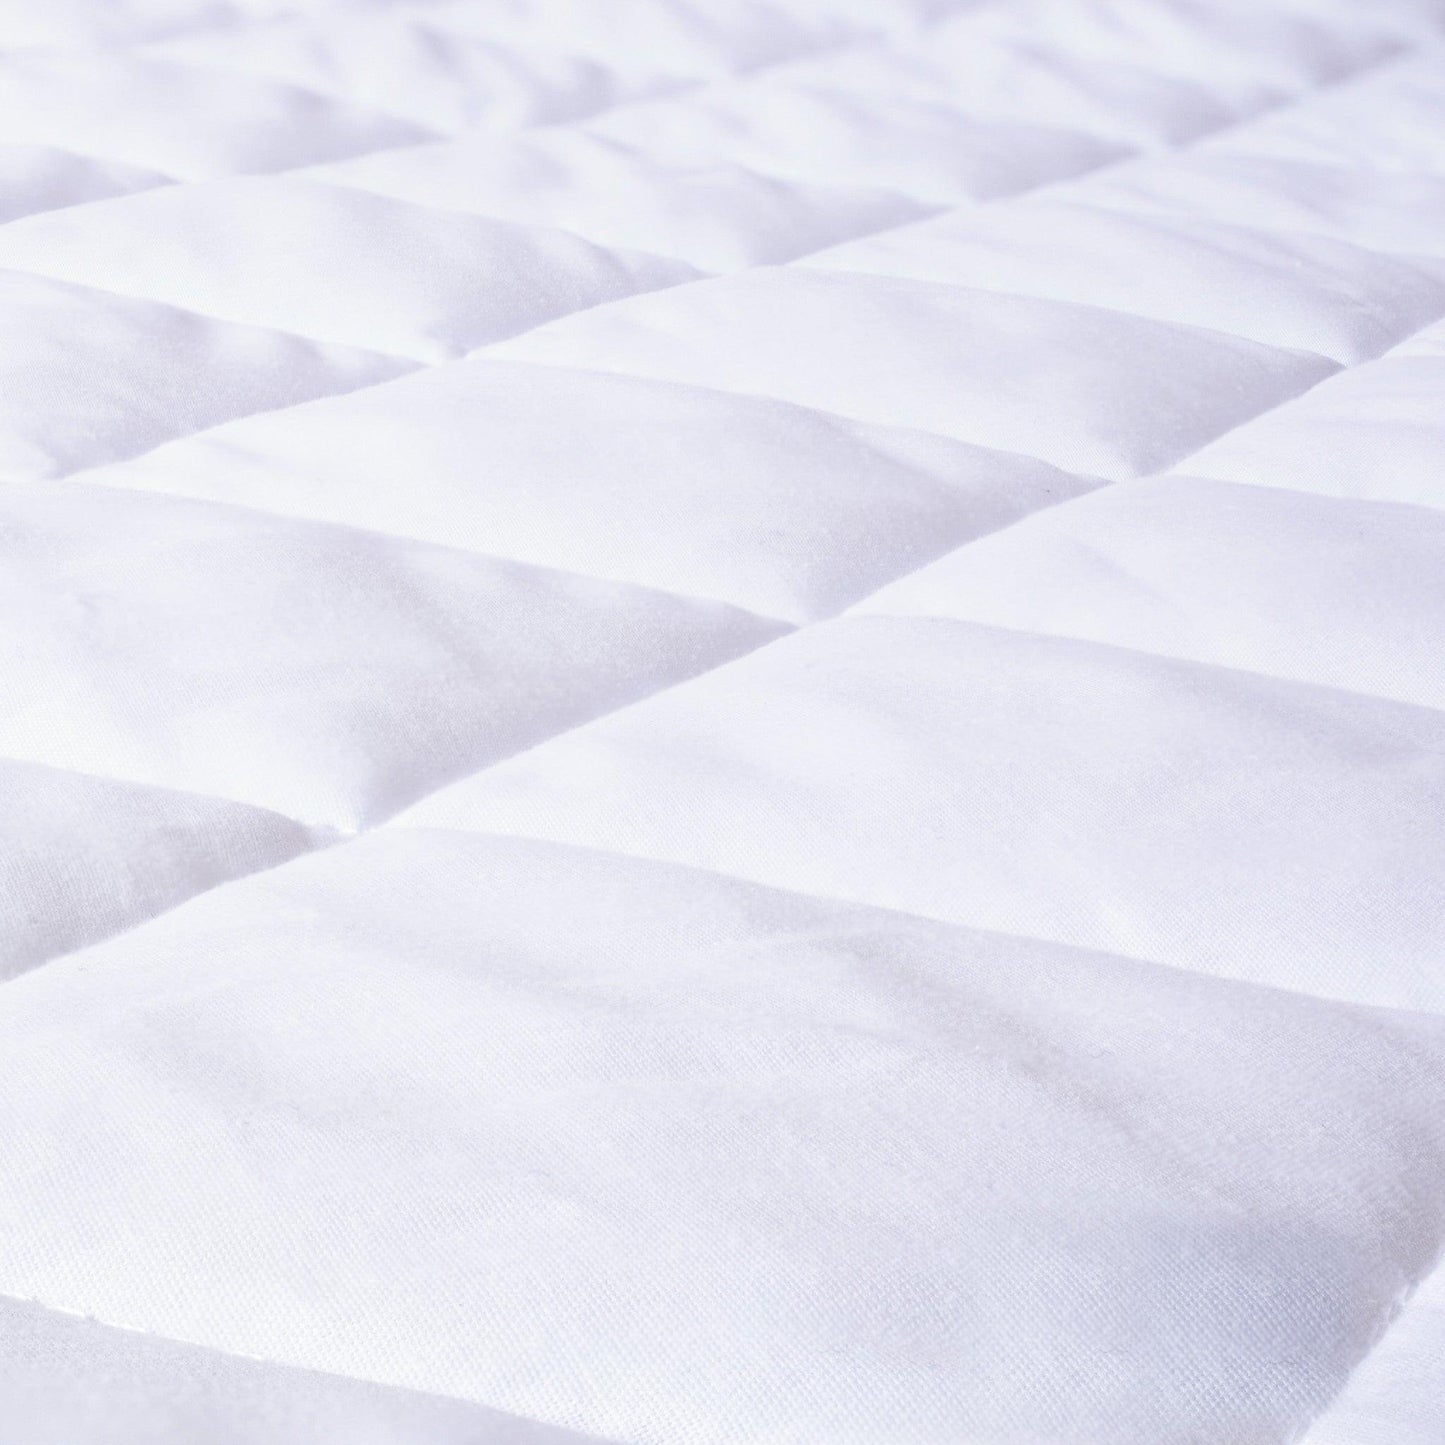 Mattress pillowtop (4 photos) - Photography and Web Design - Los Angeles, US based Shopify Experts Revo Designs